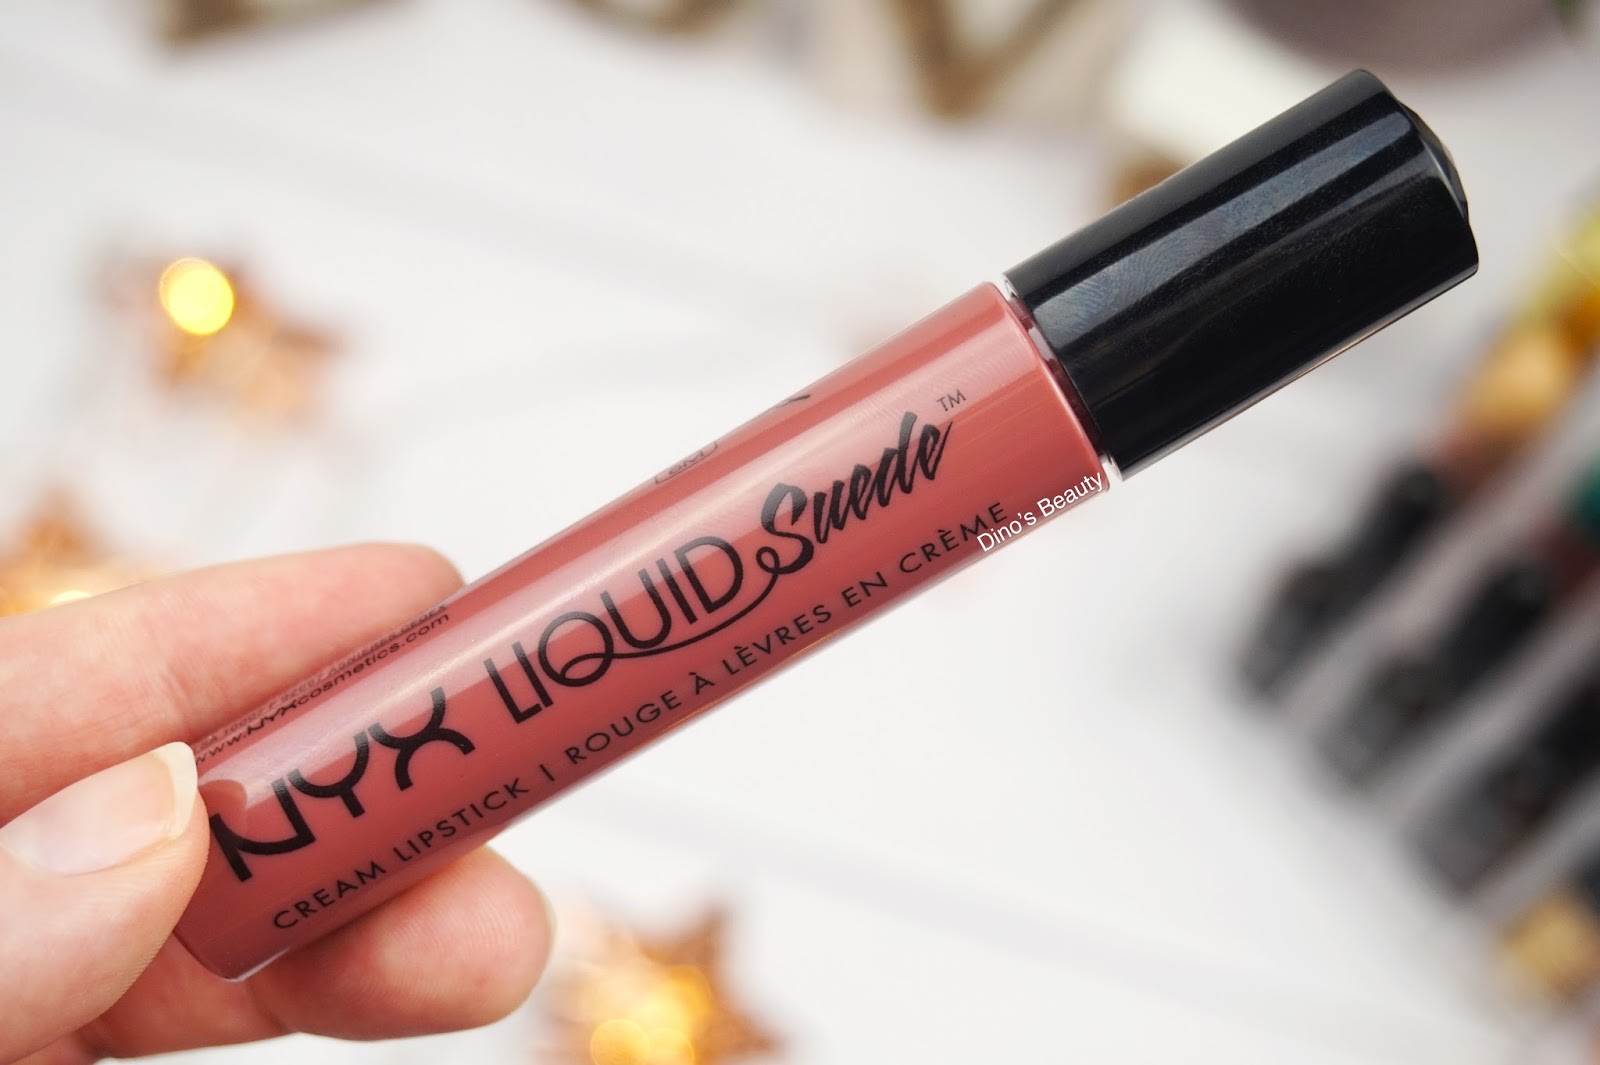 Nyx, Liquid Suede, Nyx Liquid Suede, Cream Lipsticks, Liquid Lipsticks, Lipstick, Cream, Soft Spoken, Cherry Skies, Oh Put It On, Red Lips, Nude Lips, Plum Lips, Purple, Plum, Nude, Mauve, Red, Cherry, bbloggers, beauty, beauty bloggers, beauty review, review, makeup, makeup review, swatches, Review 